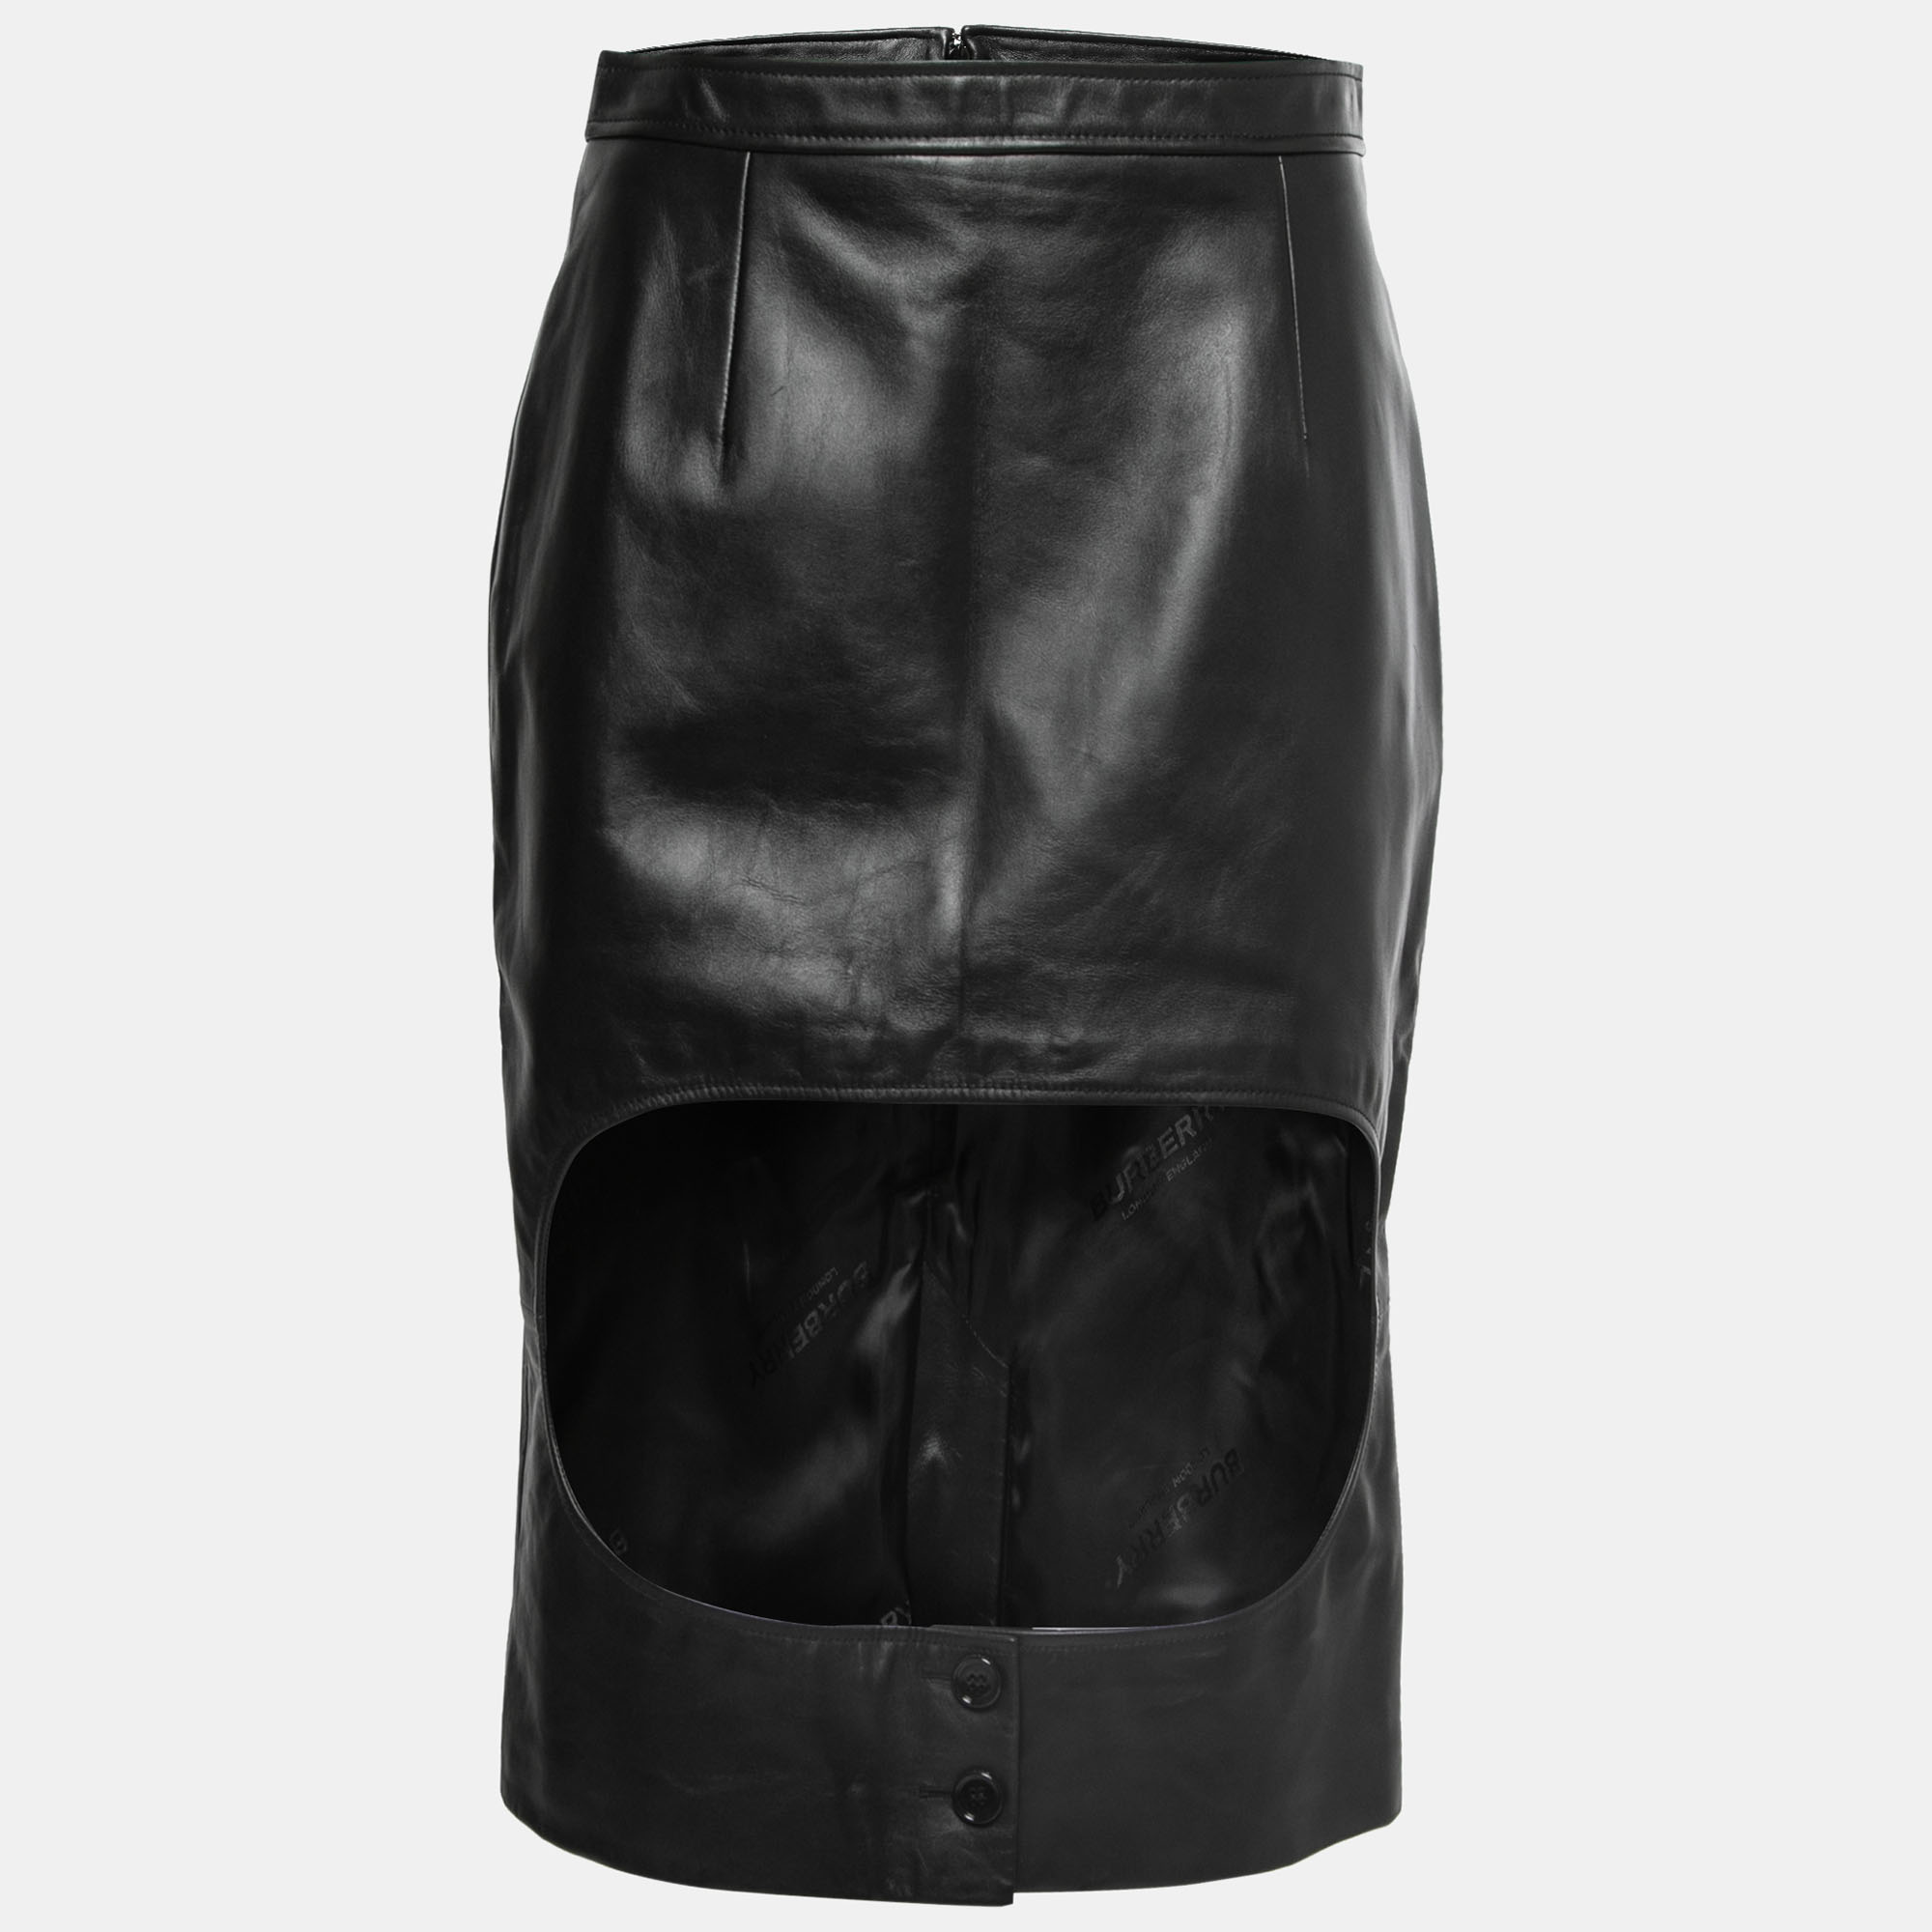 Burberry black leather cut out pencil skirt s